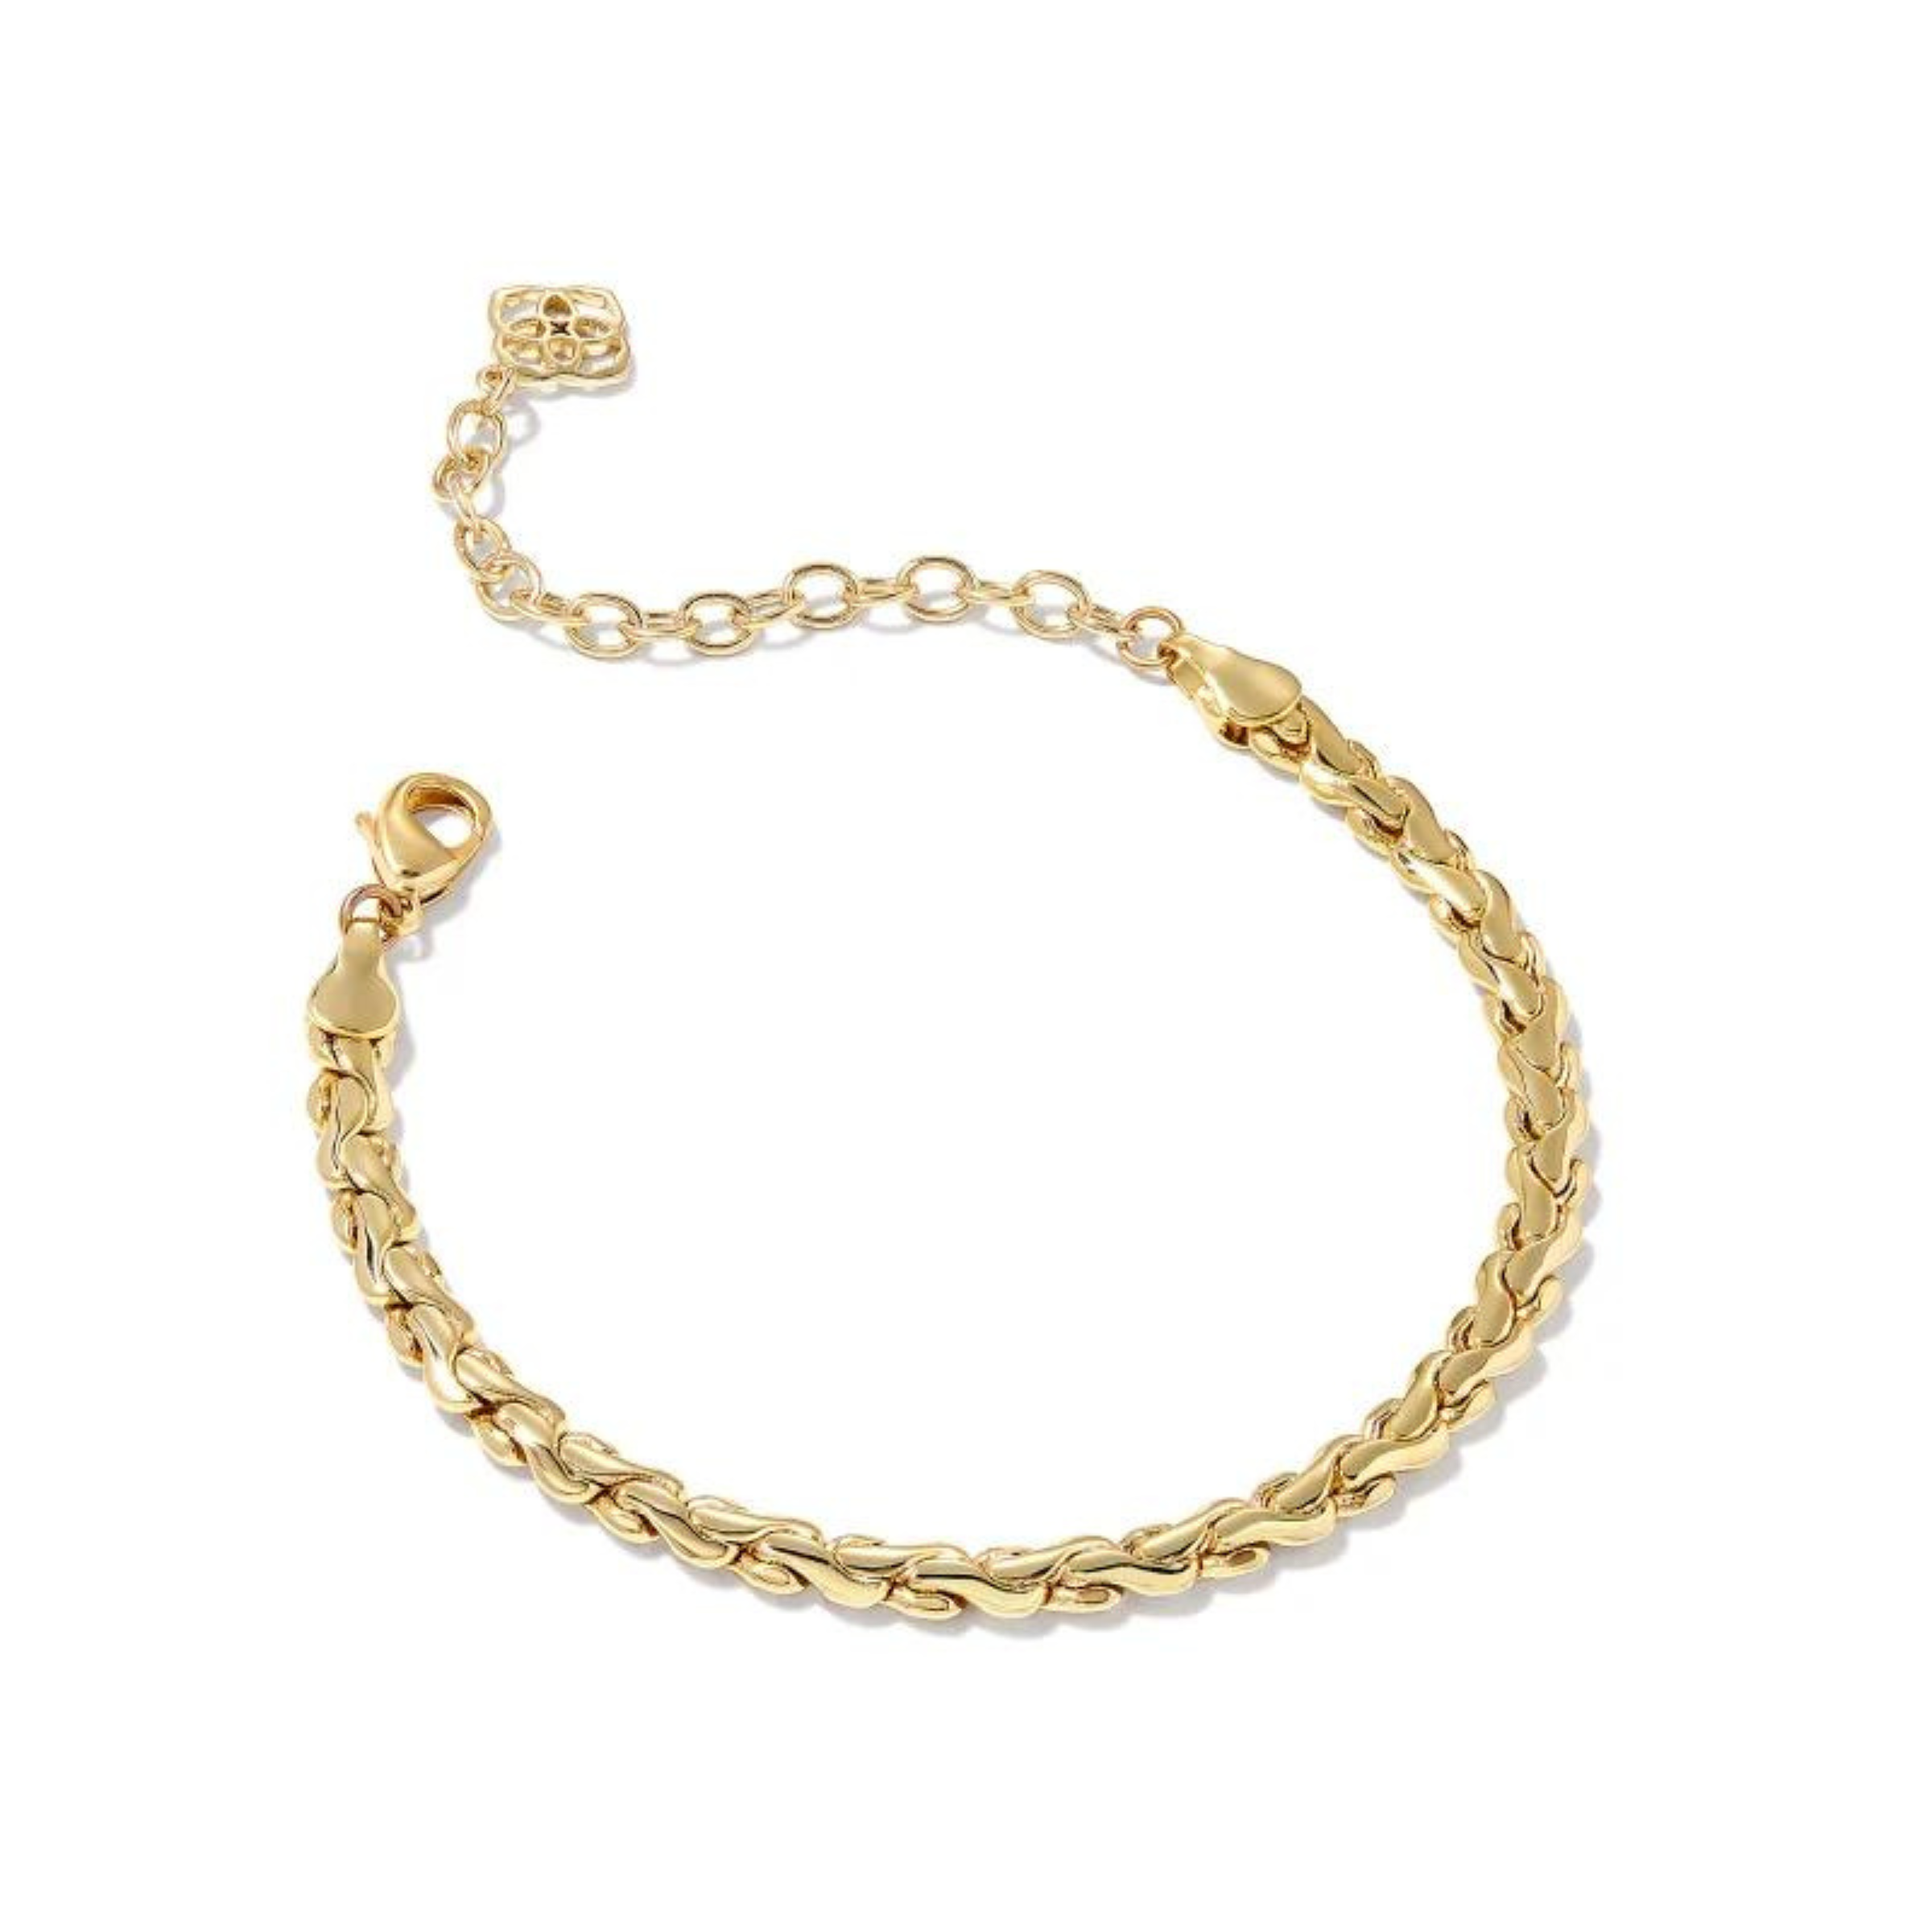 Adjustable chain bracelet in gold. This bracelet is pictured on a white background. 